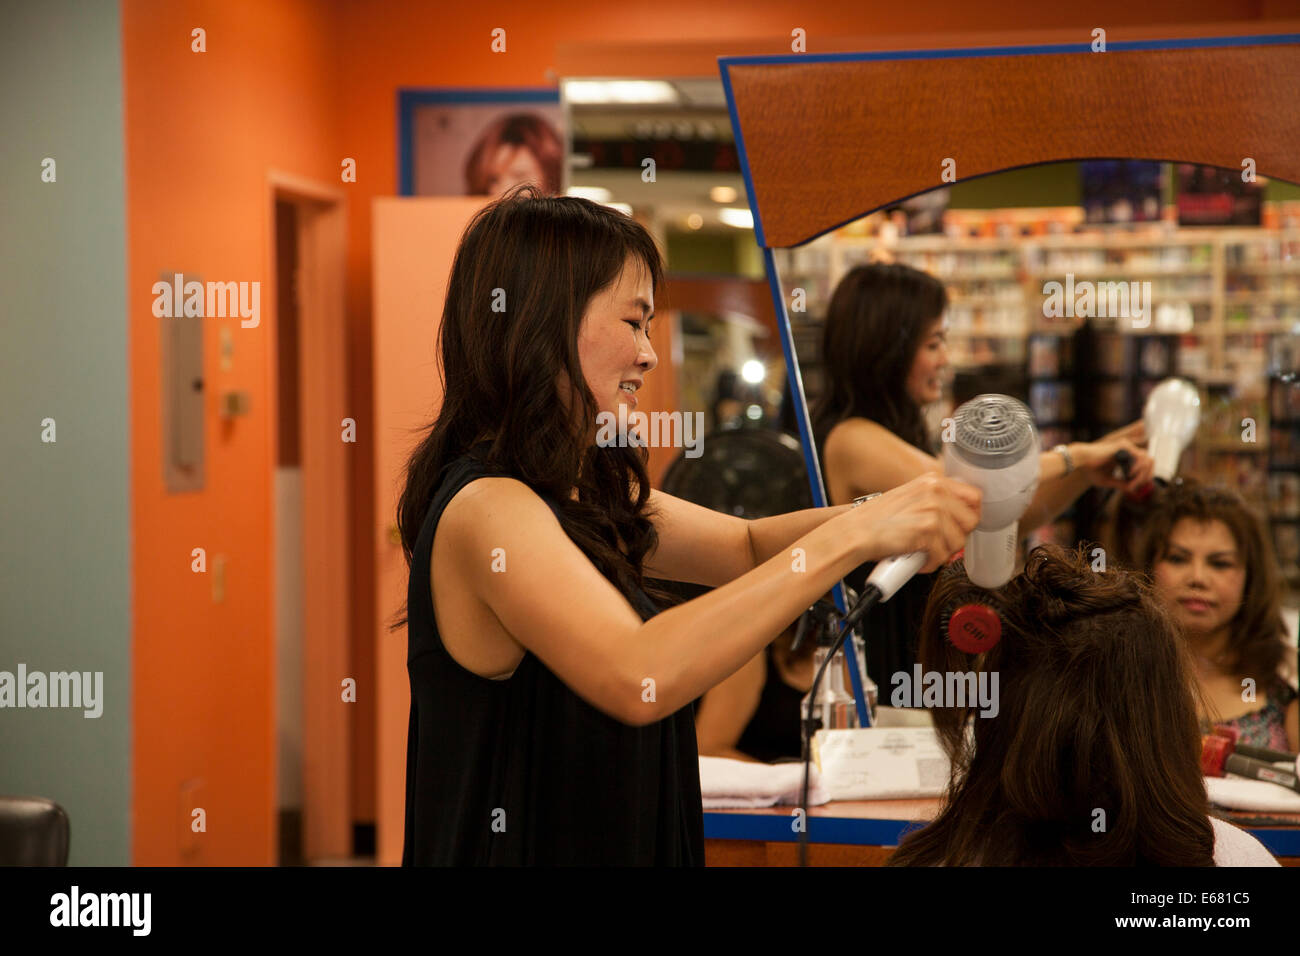 Vietnamese hairdresser working on her client's hair, Westminster, Orange County, California, USA Stock Photo